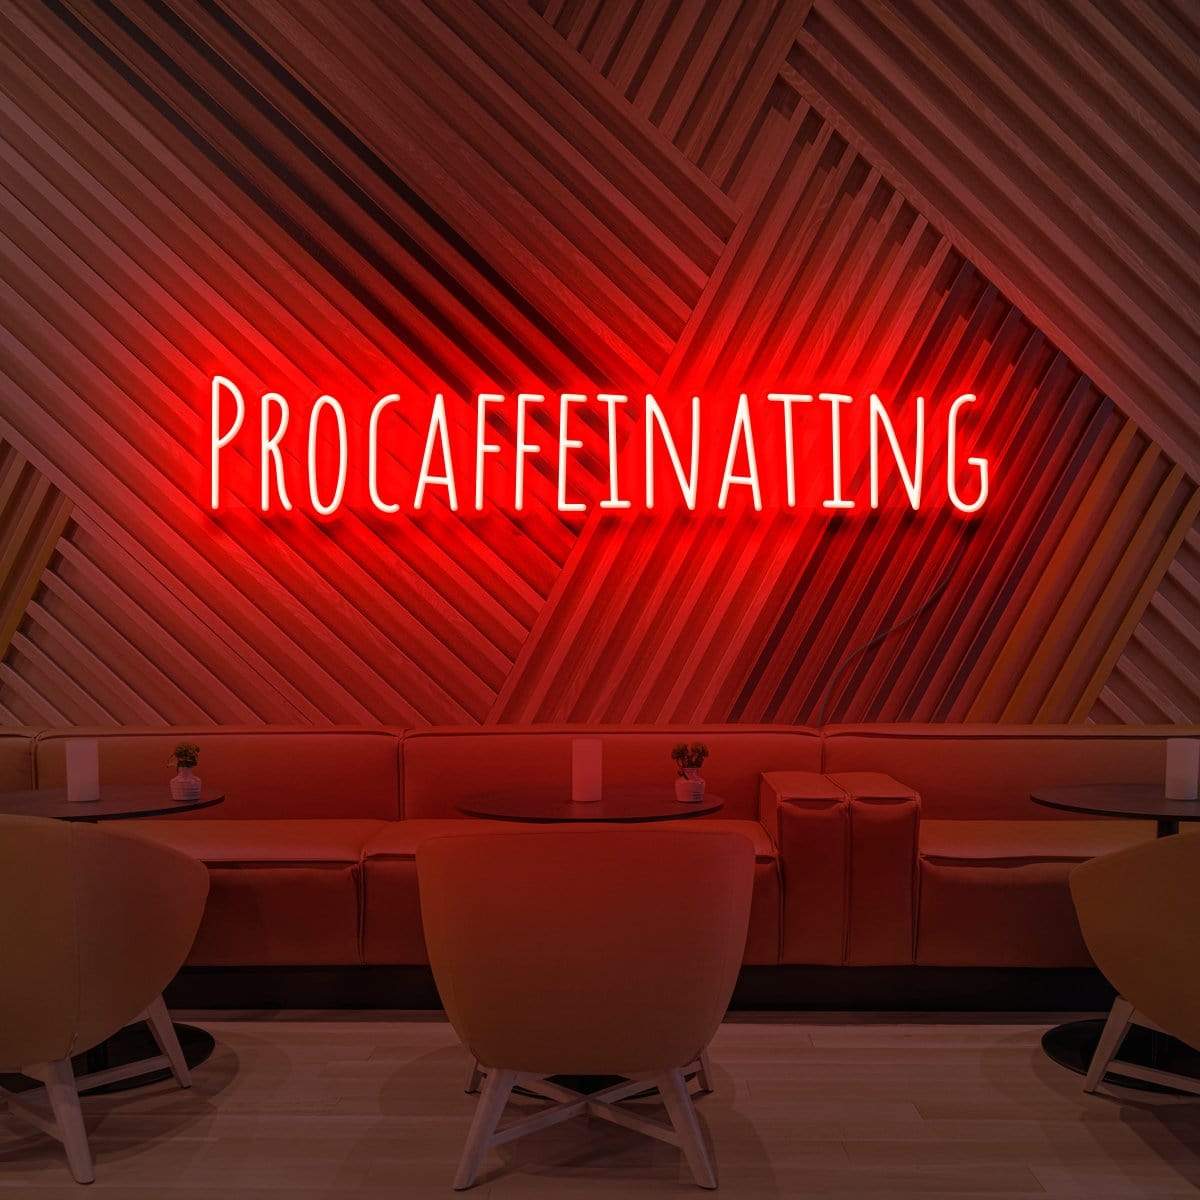 "Procaffeinating" Neon Sign for Cafés 60cm (2ft) / Red / LED Neon by Neon Icons